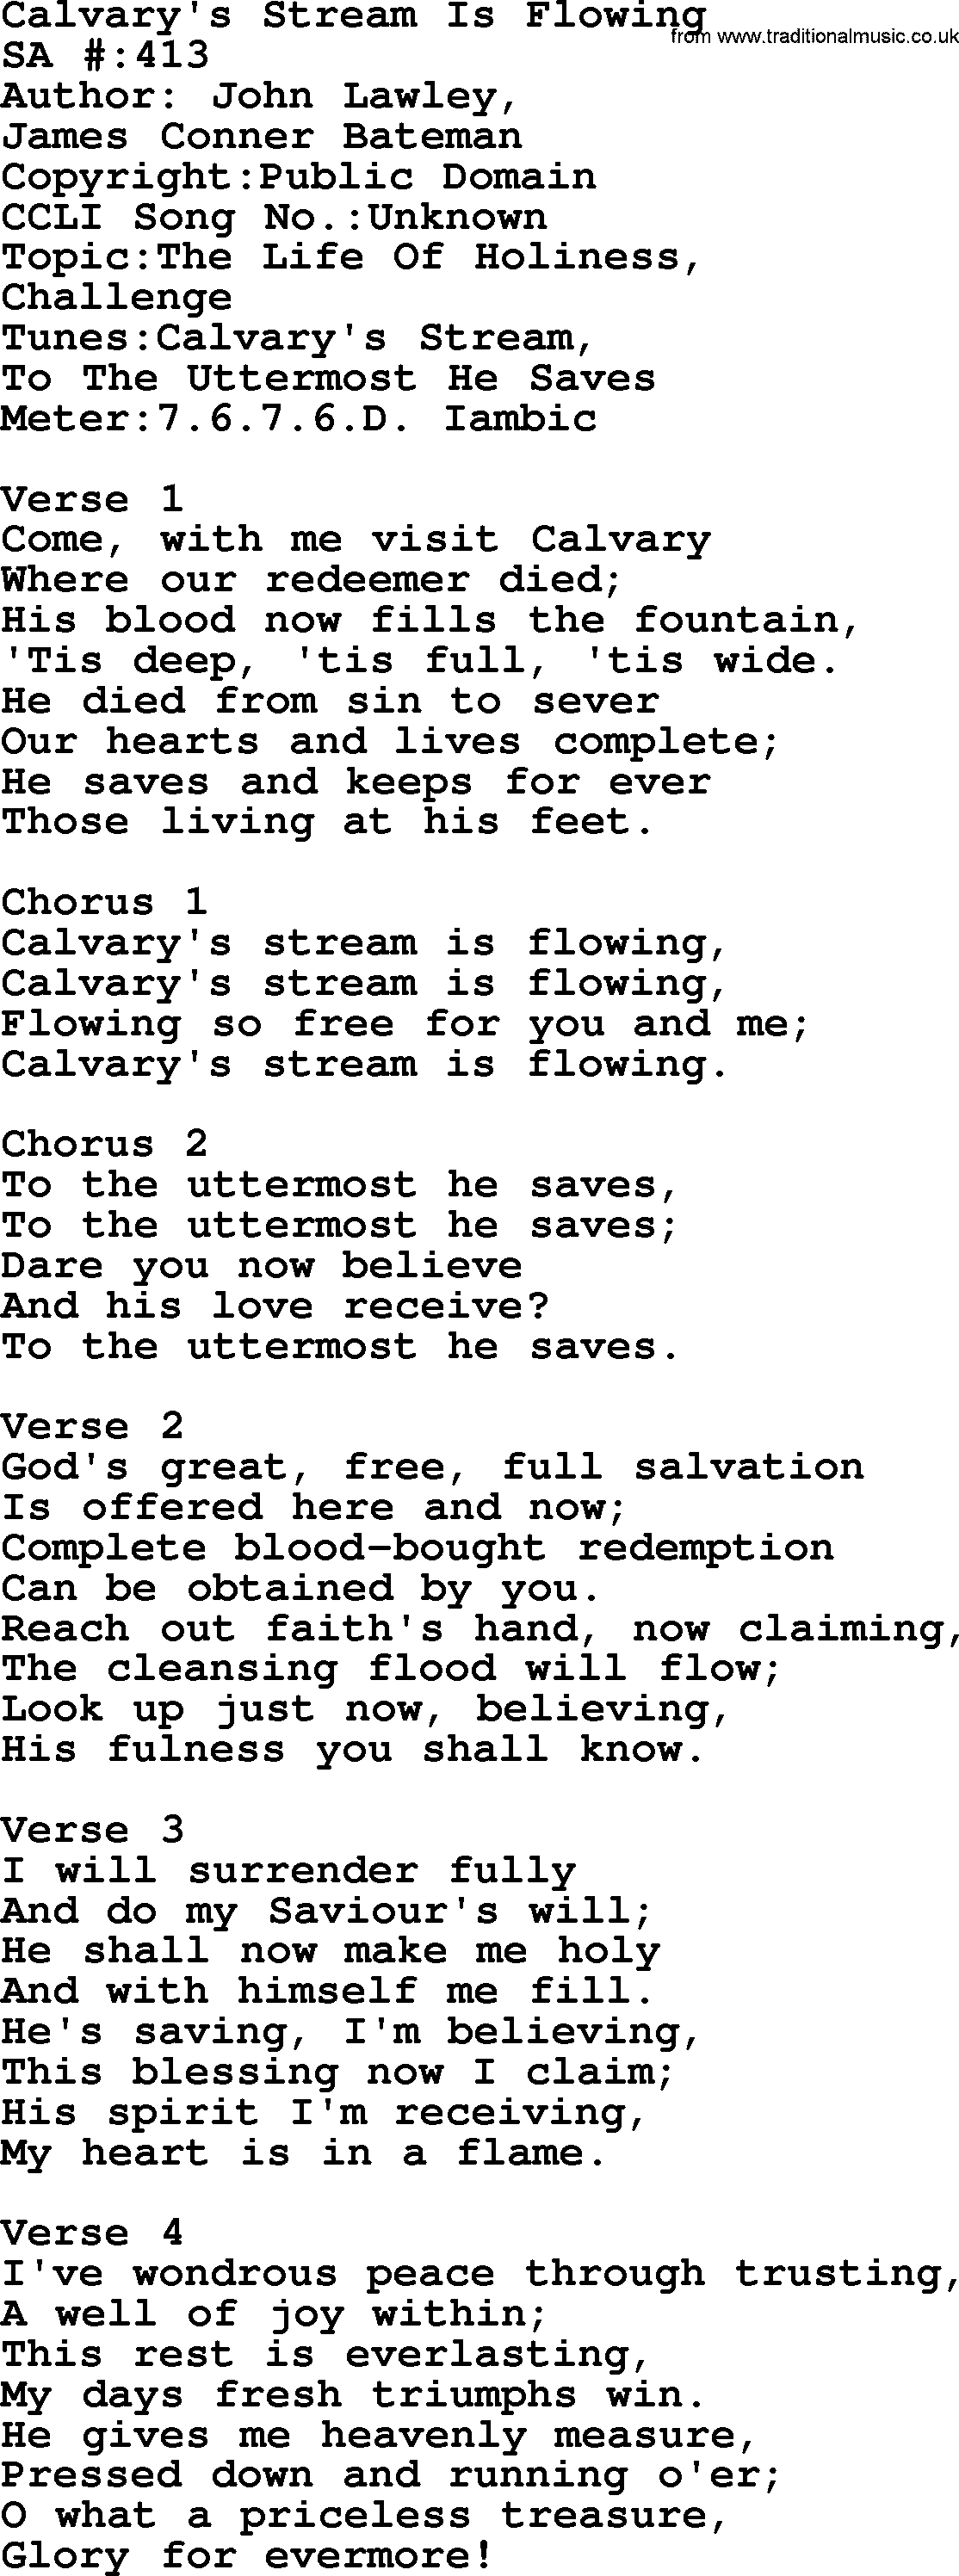 Salvation Army Hymnal, title: Calvary's Stream Is Flowing, with lyrics and PDF,